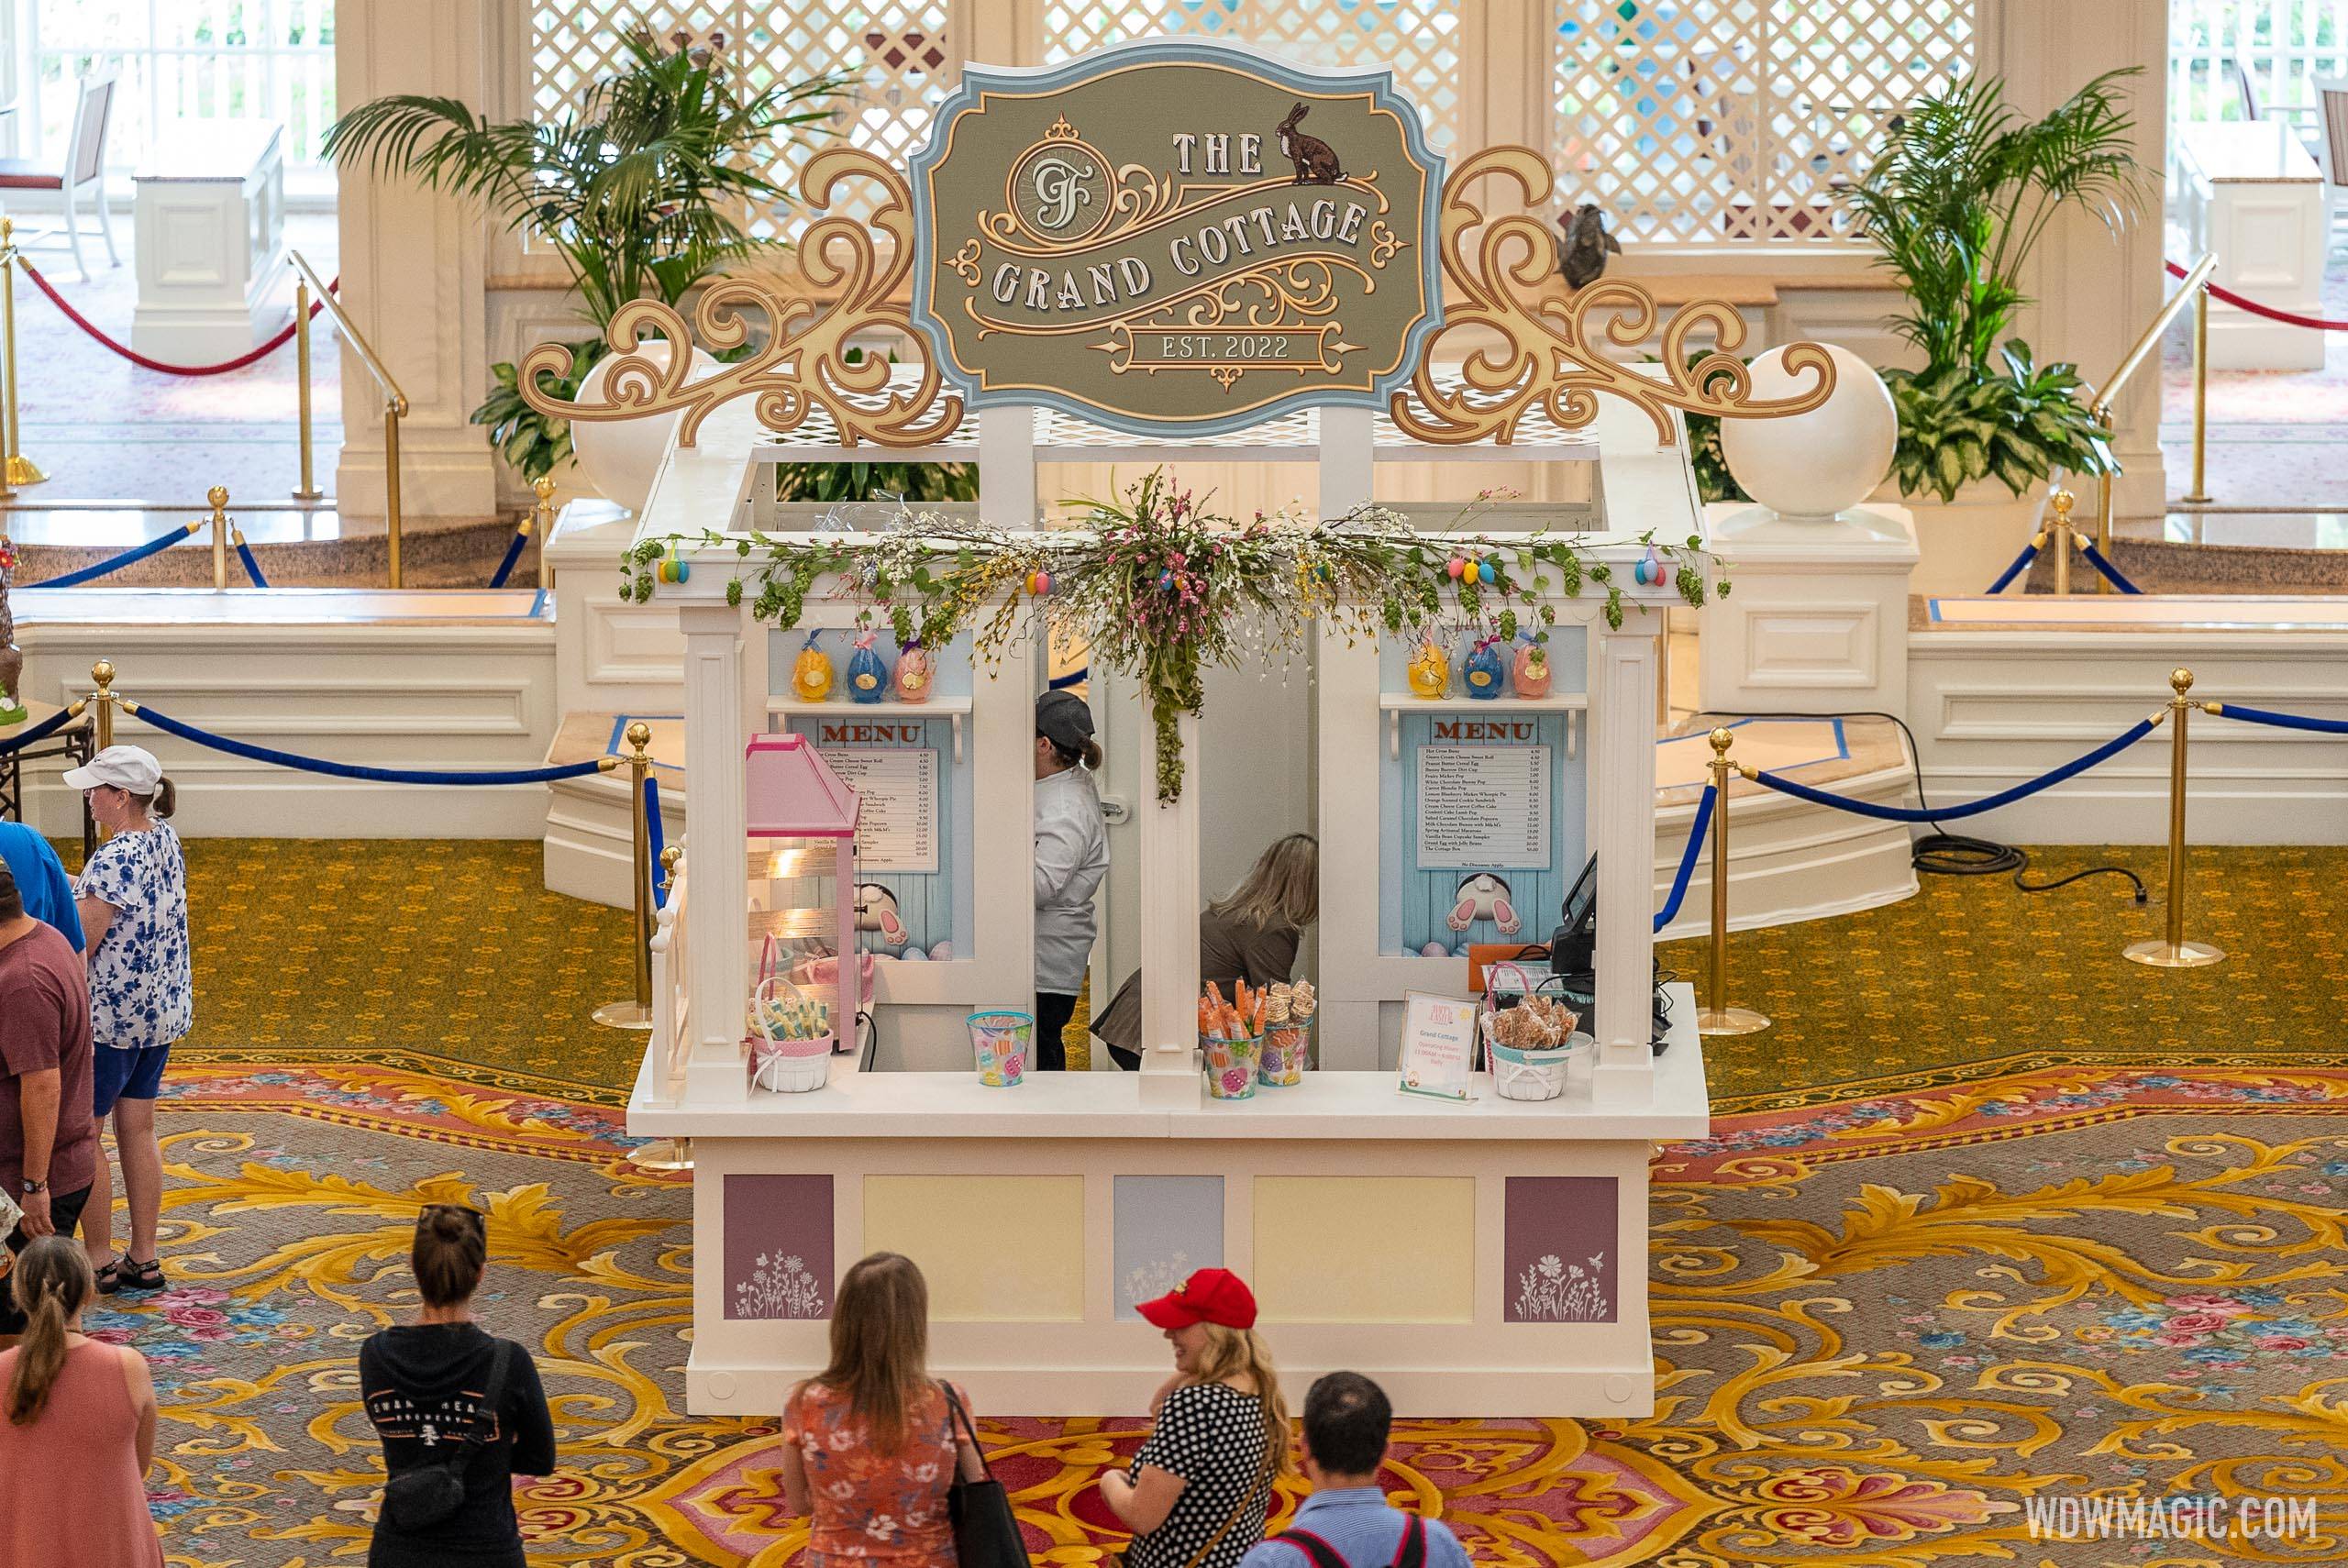 The Grand Cottage returns to Disney's Grand Floridian Resort offering Easter goodies